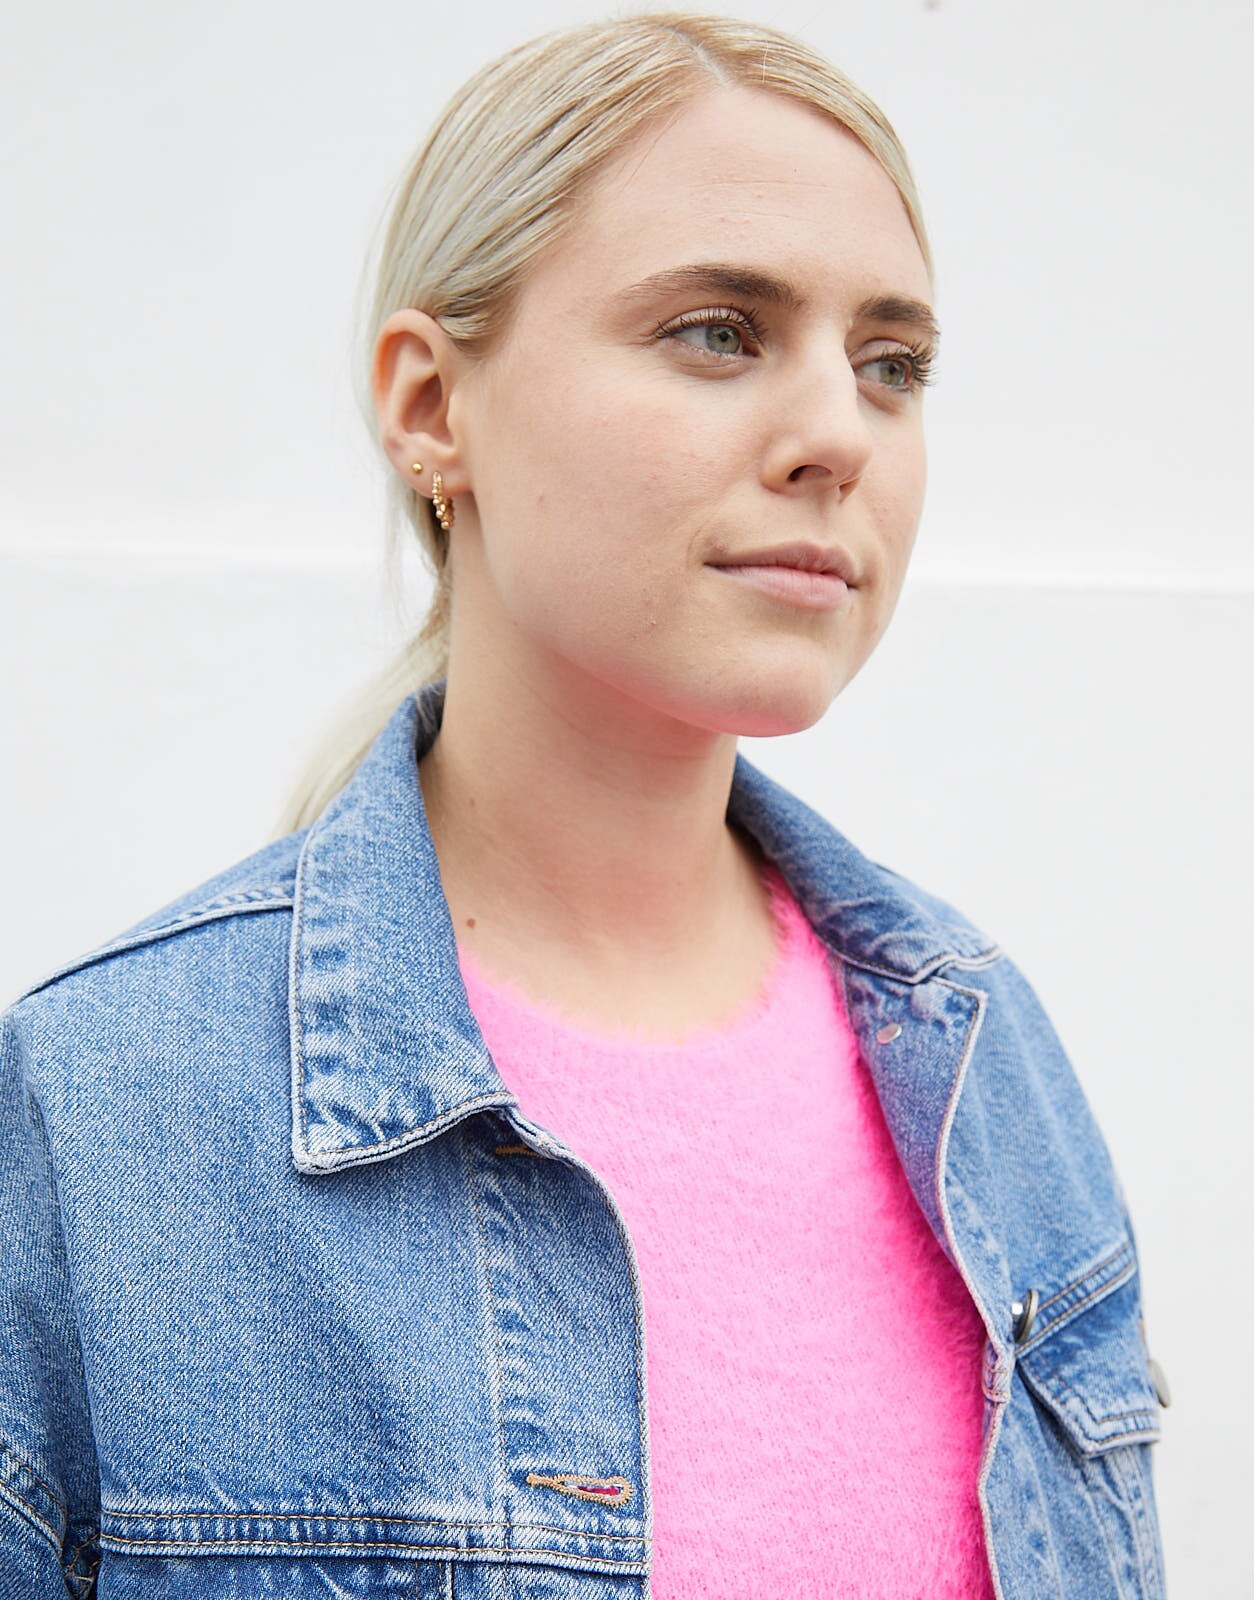 ASOS junior fashion ed Beccy in neon pink